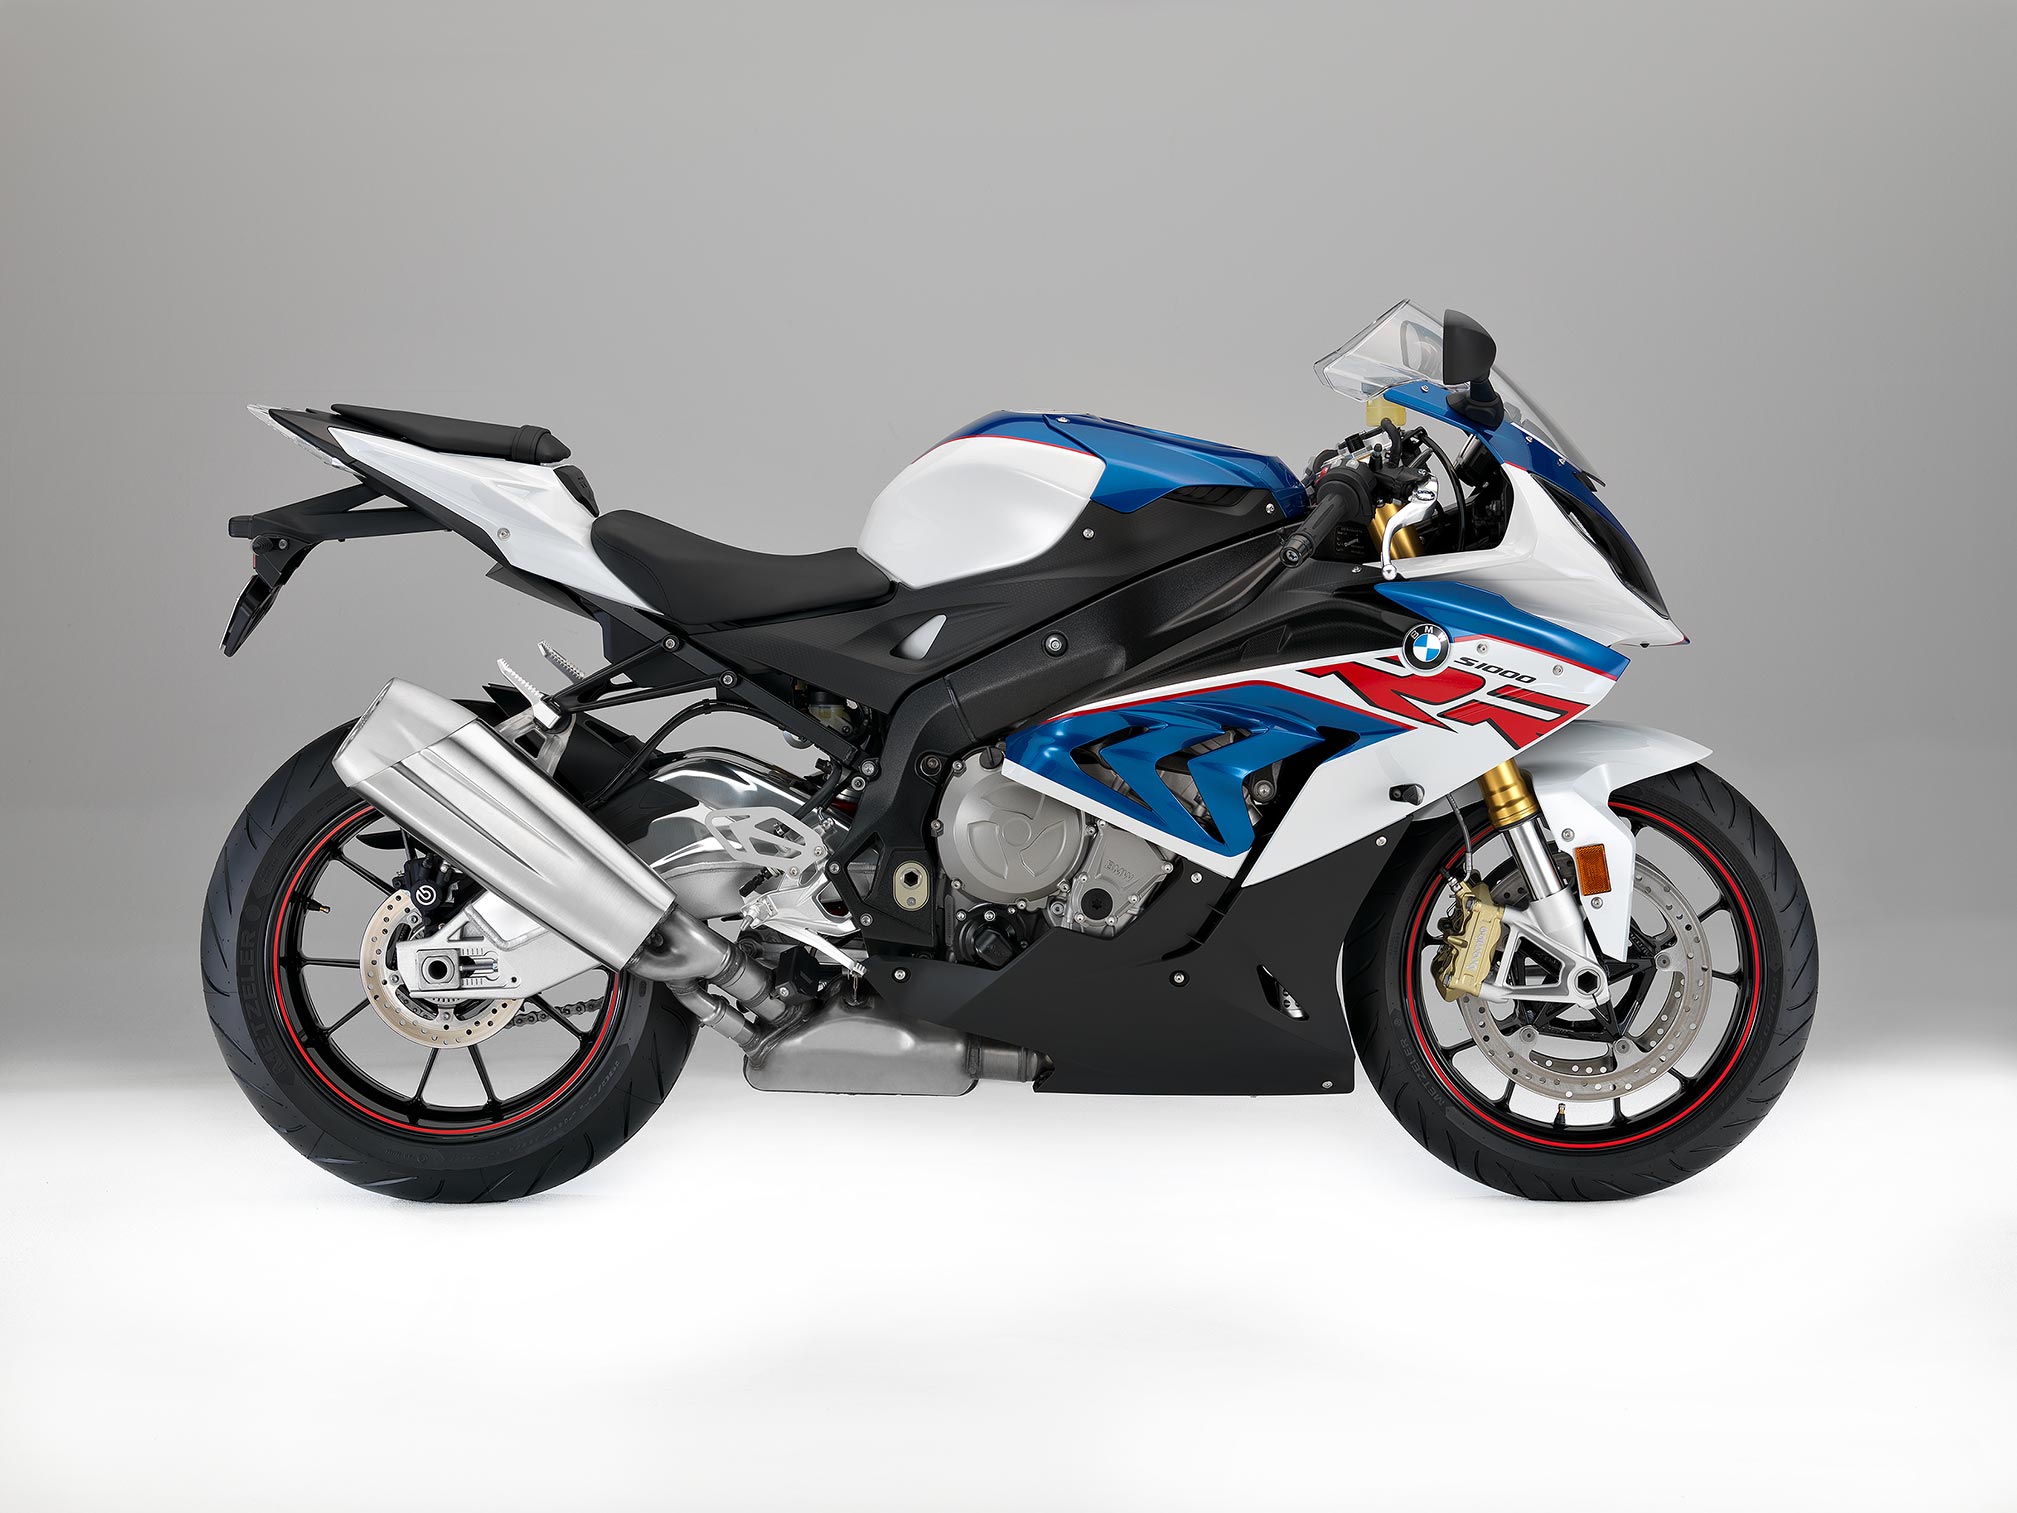 S 1000 RR ABS